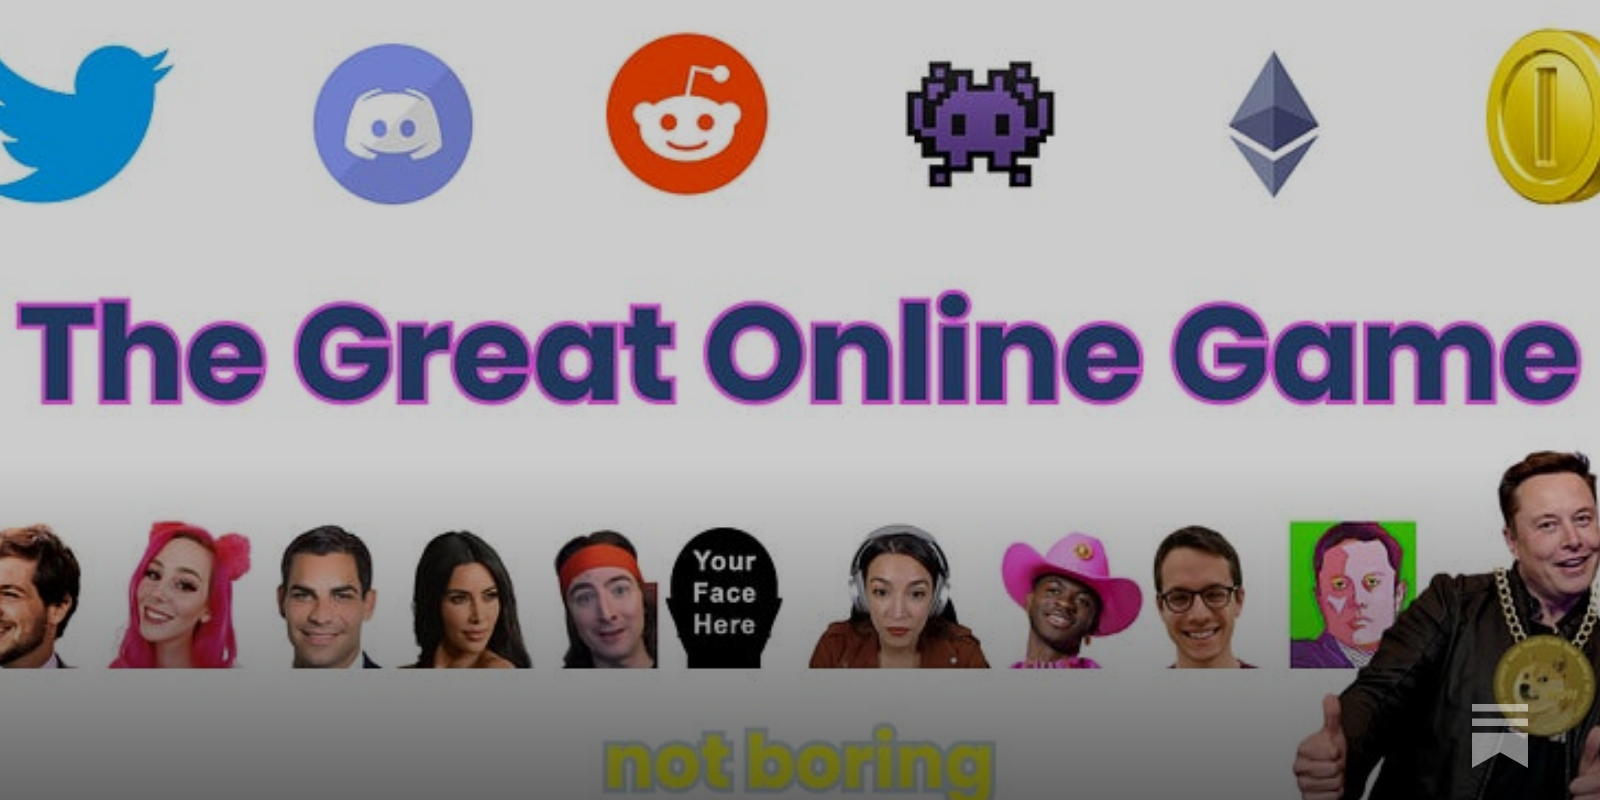 The Great Online Game - Not Boring by Packy McCormick